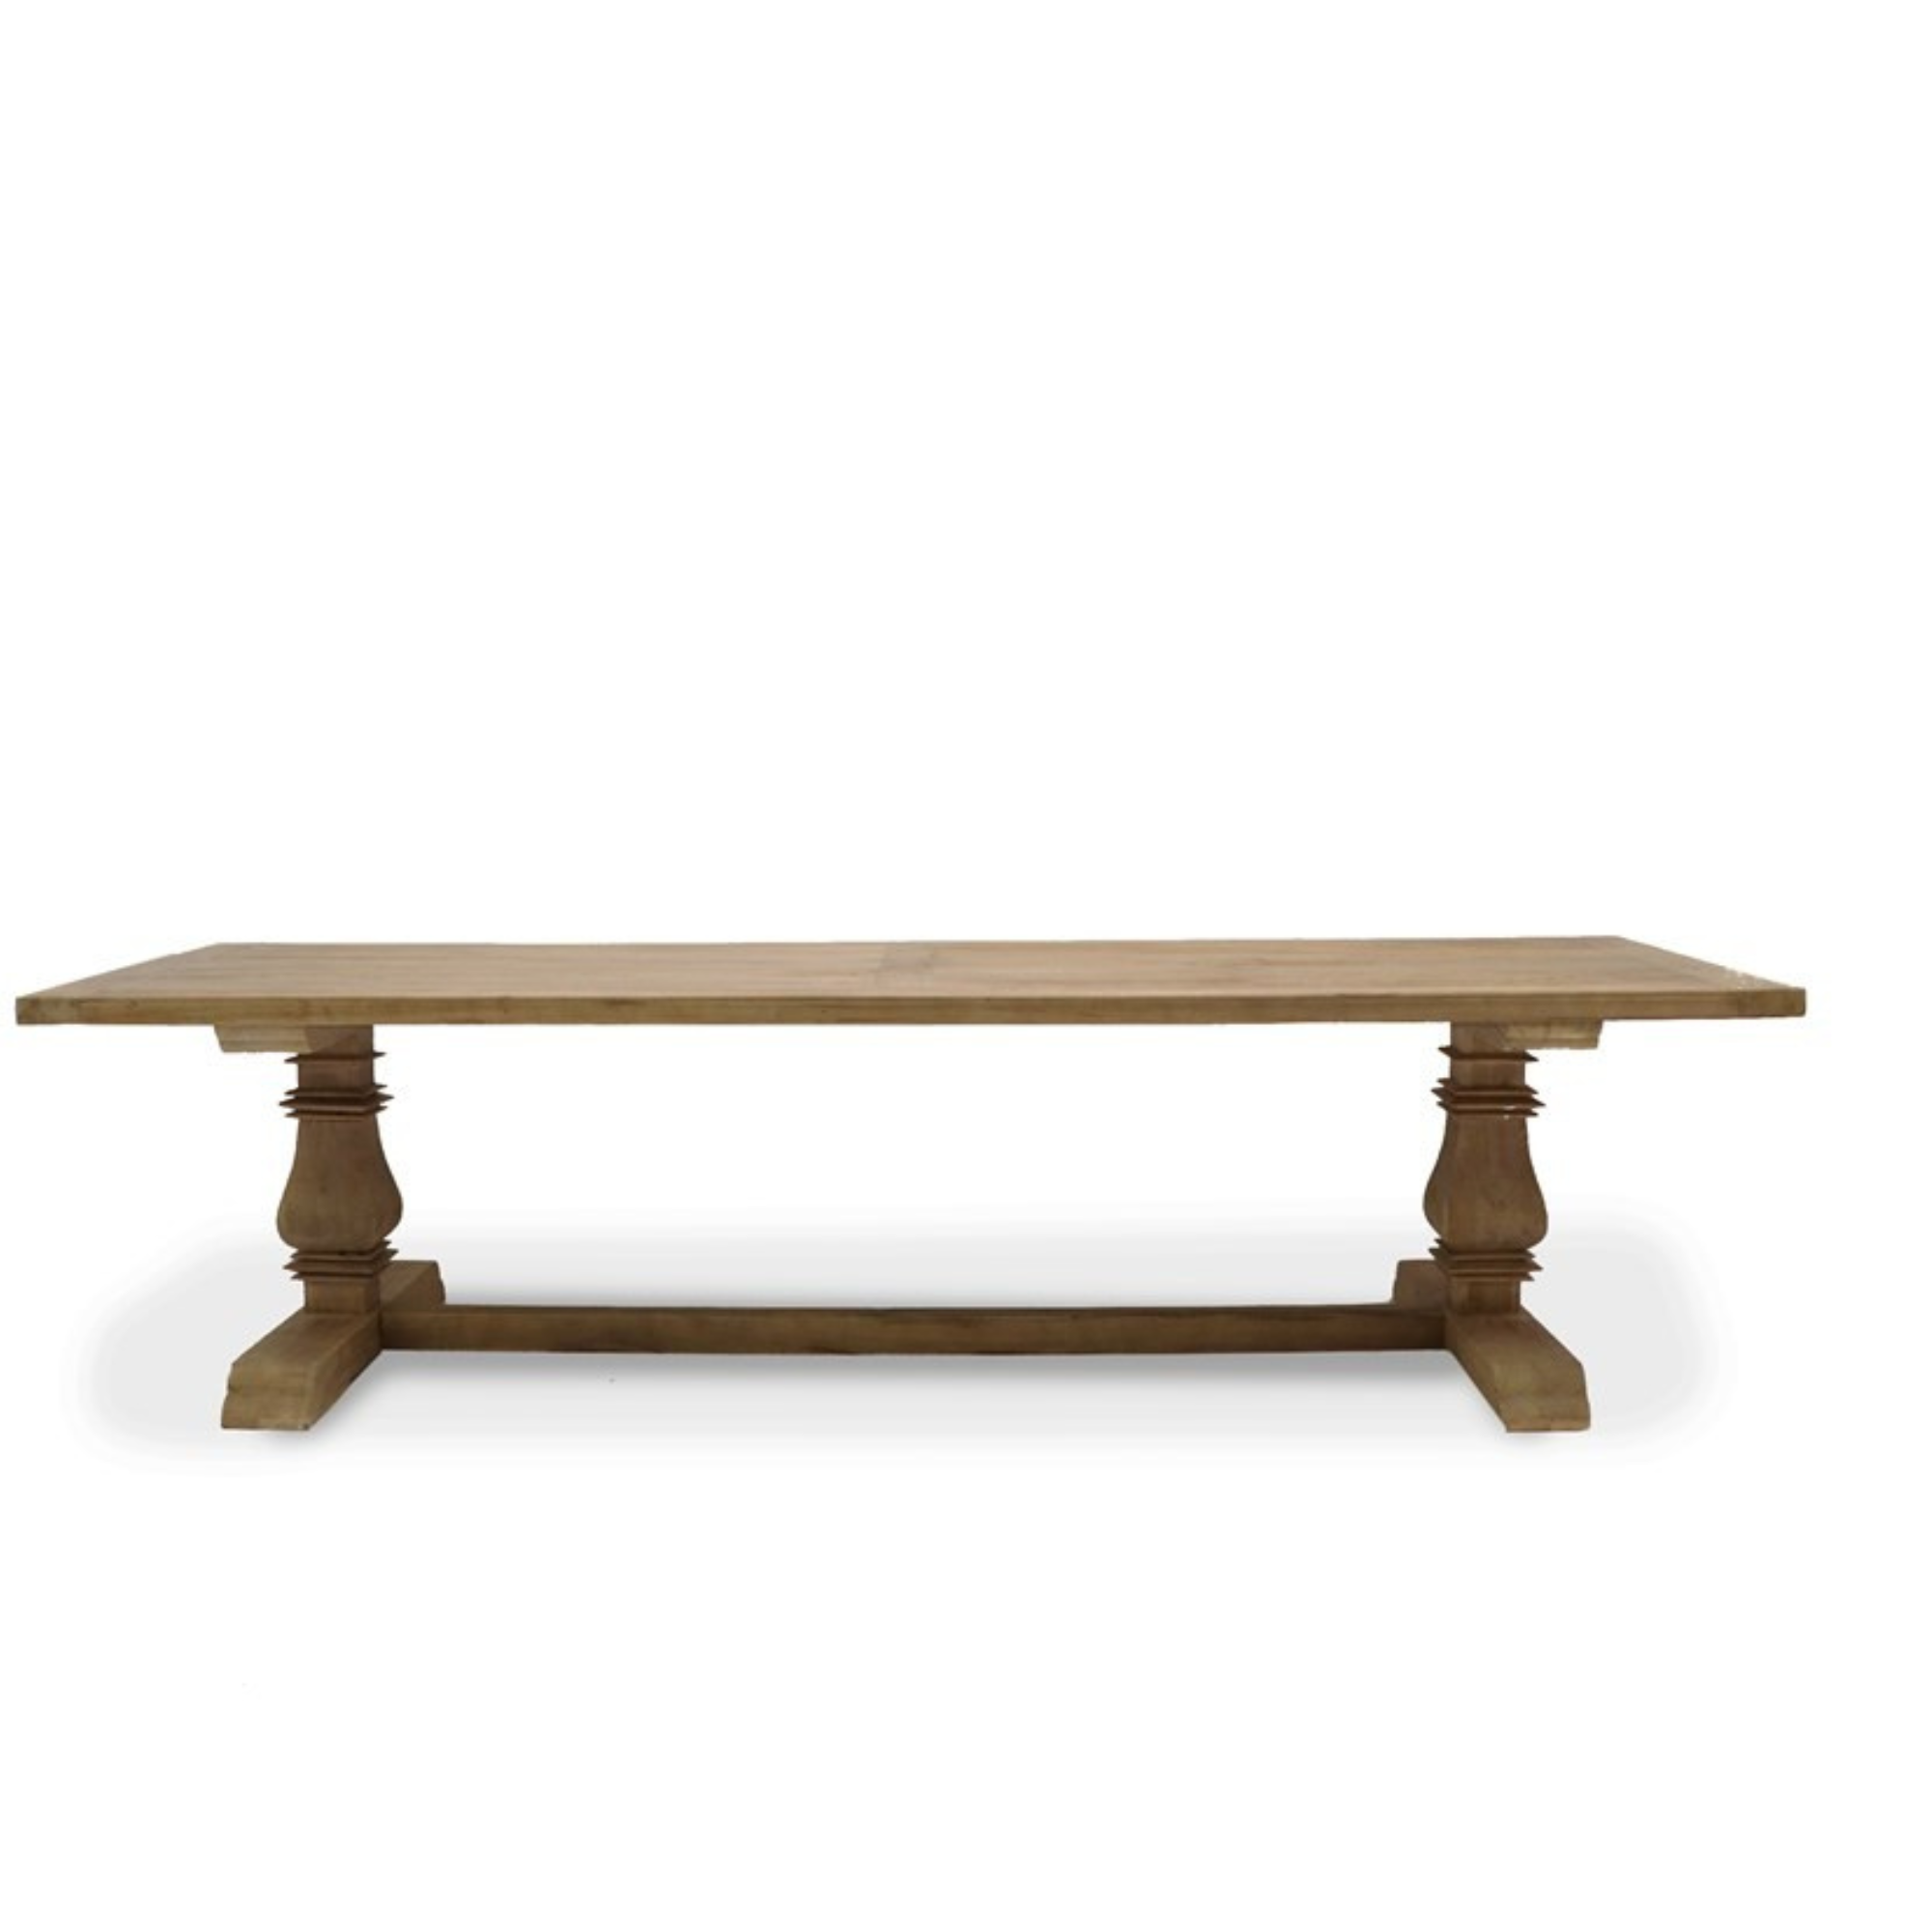 MULHOUSE SALVAGED ELM DINING TABLE | 3 SIZES